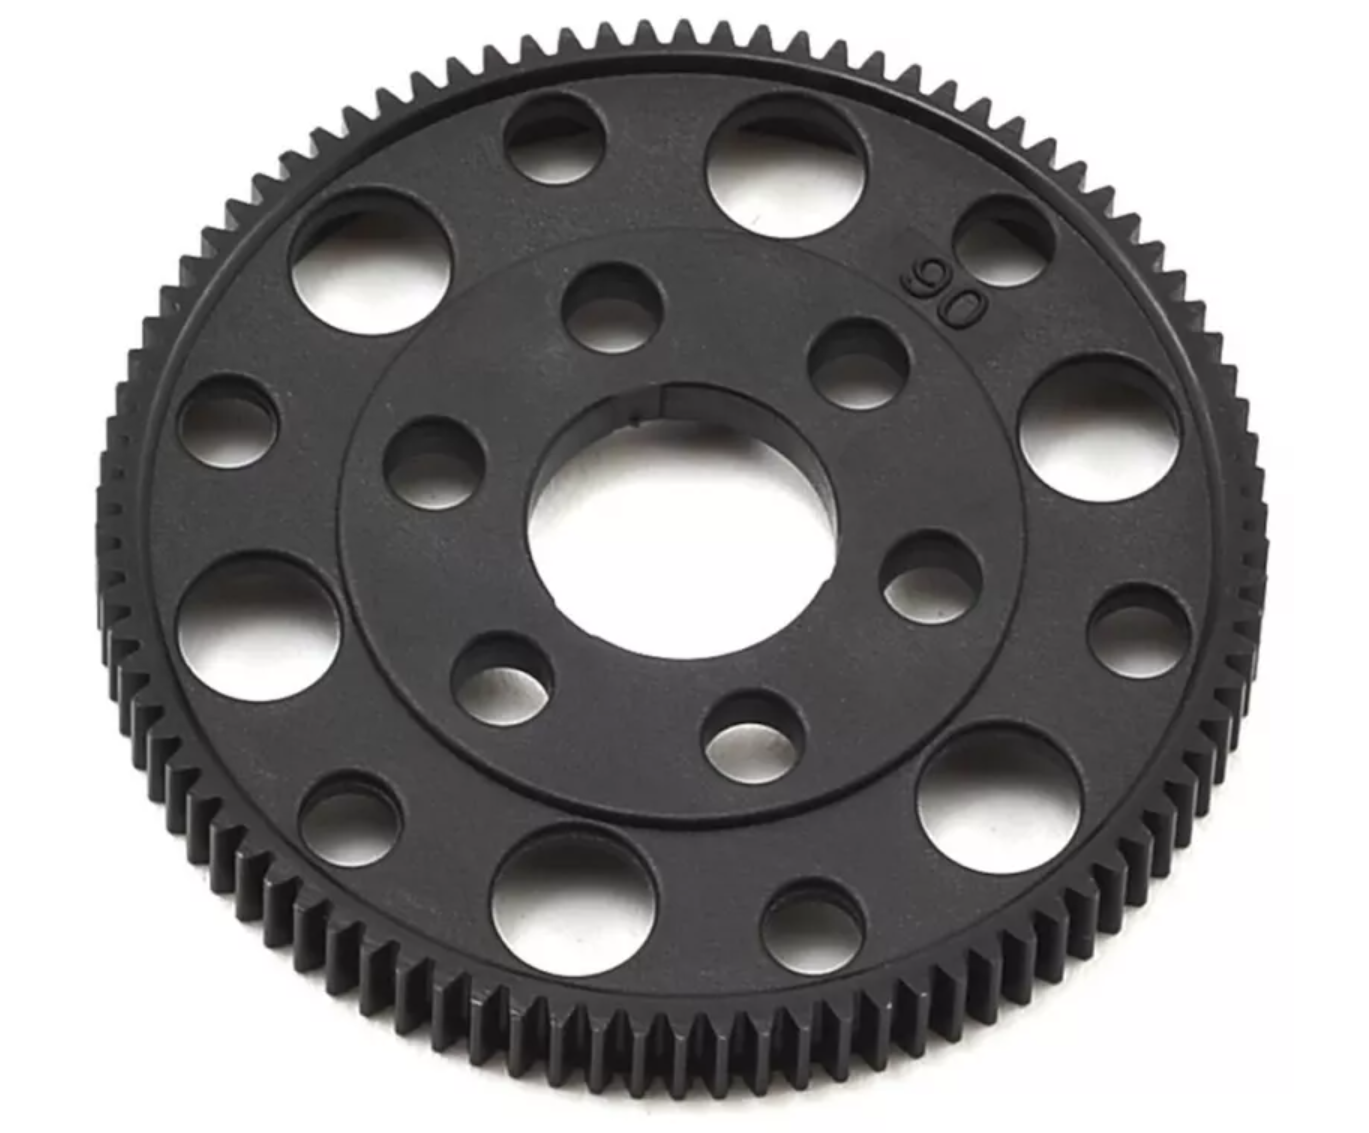 Xray Offset Spur Gear (Stock 21.5T) - 90T 64P